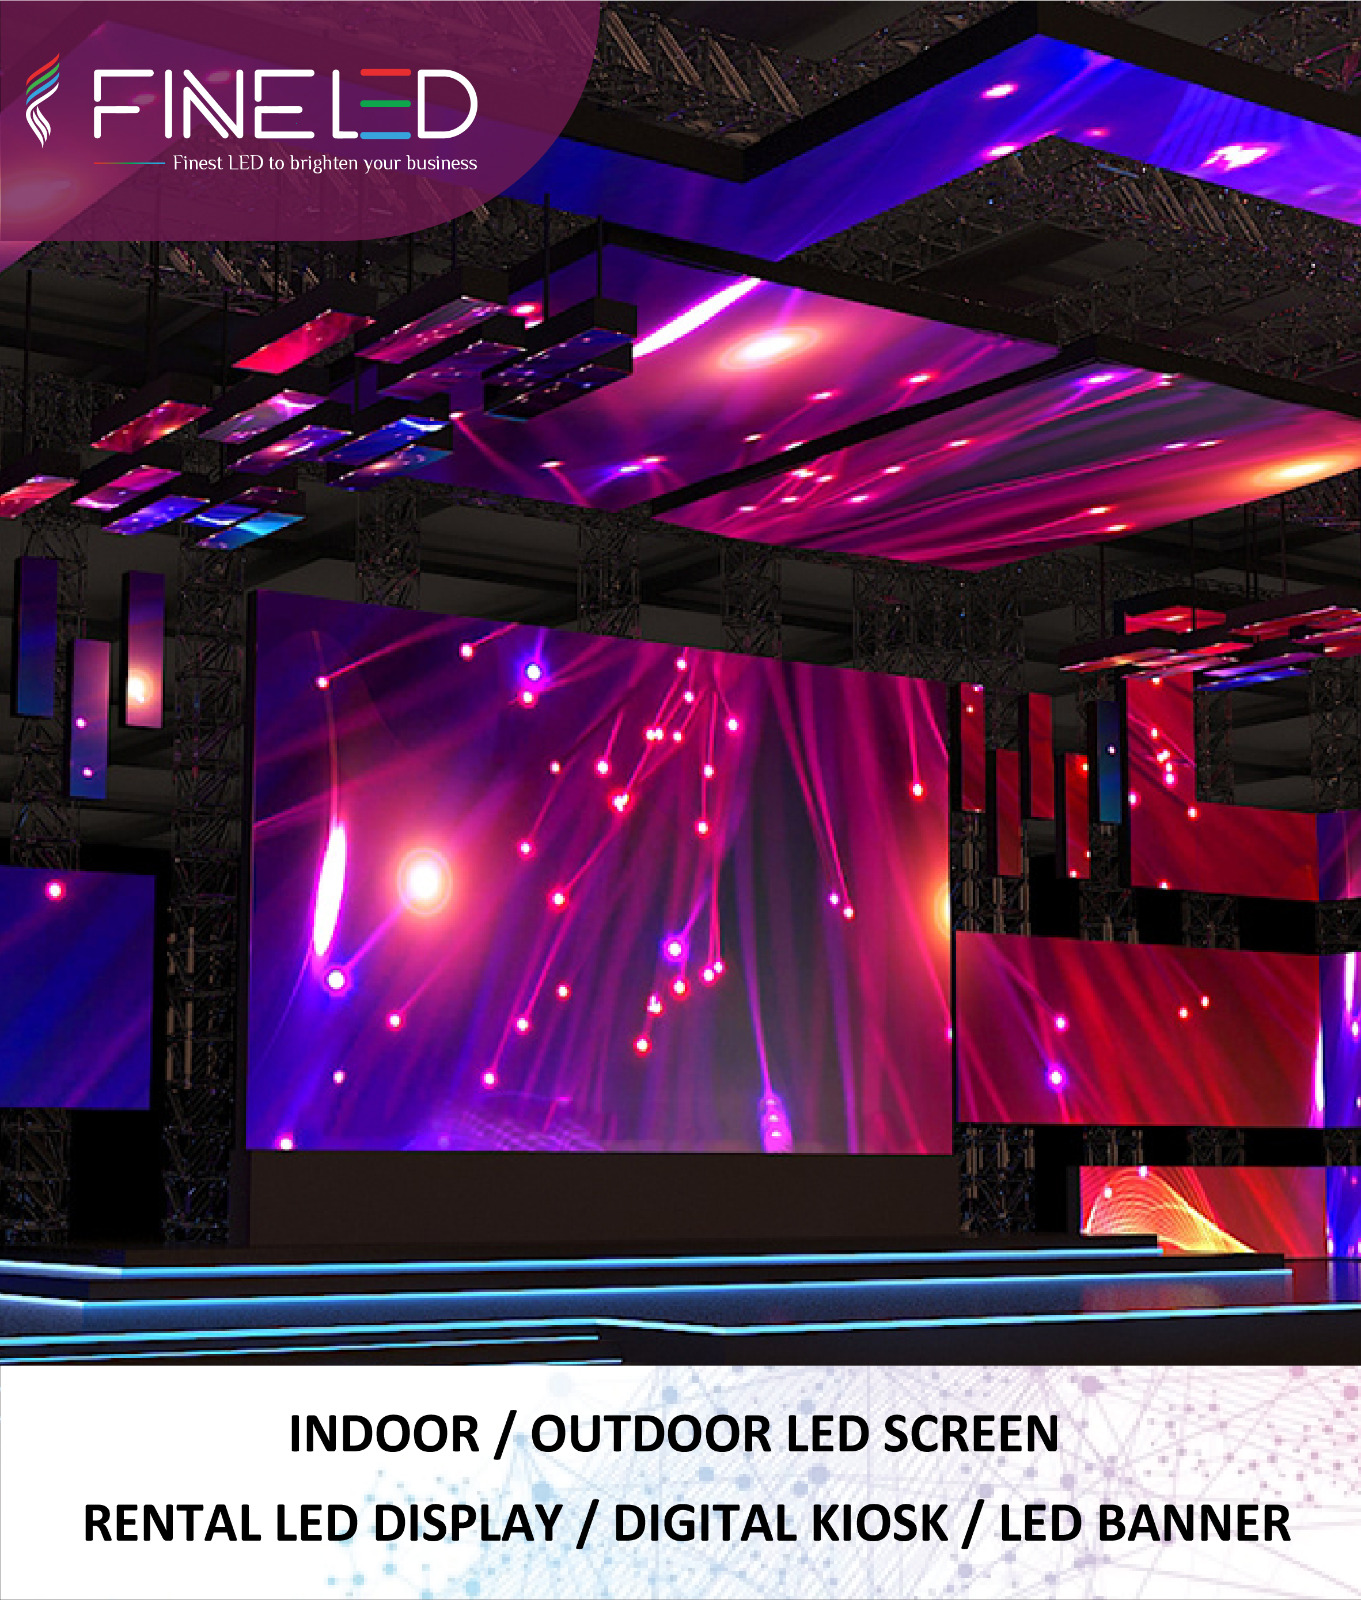 LED SCREEN for fixing and Rental